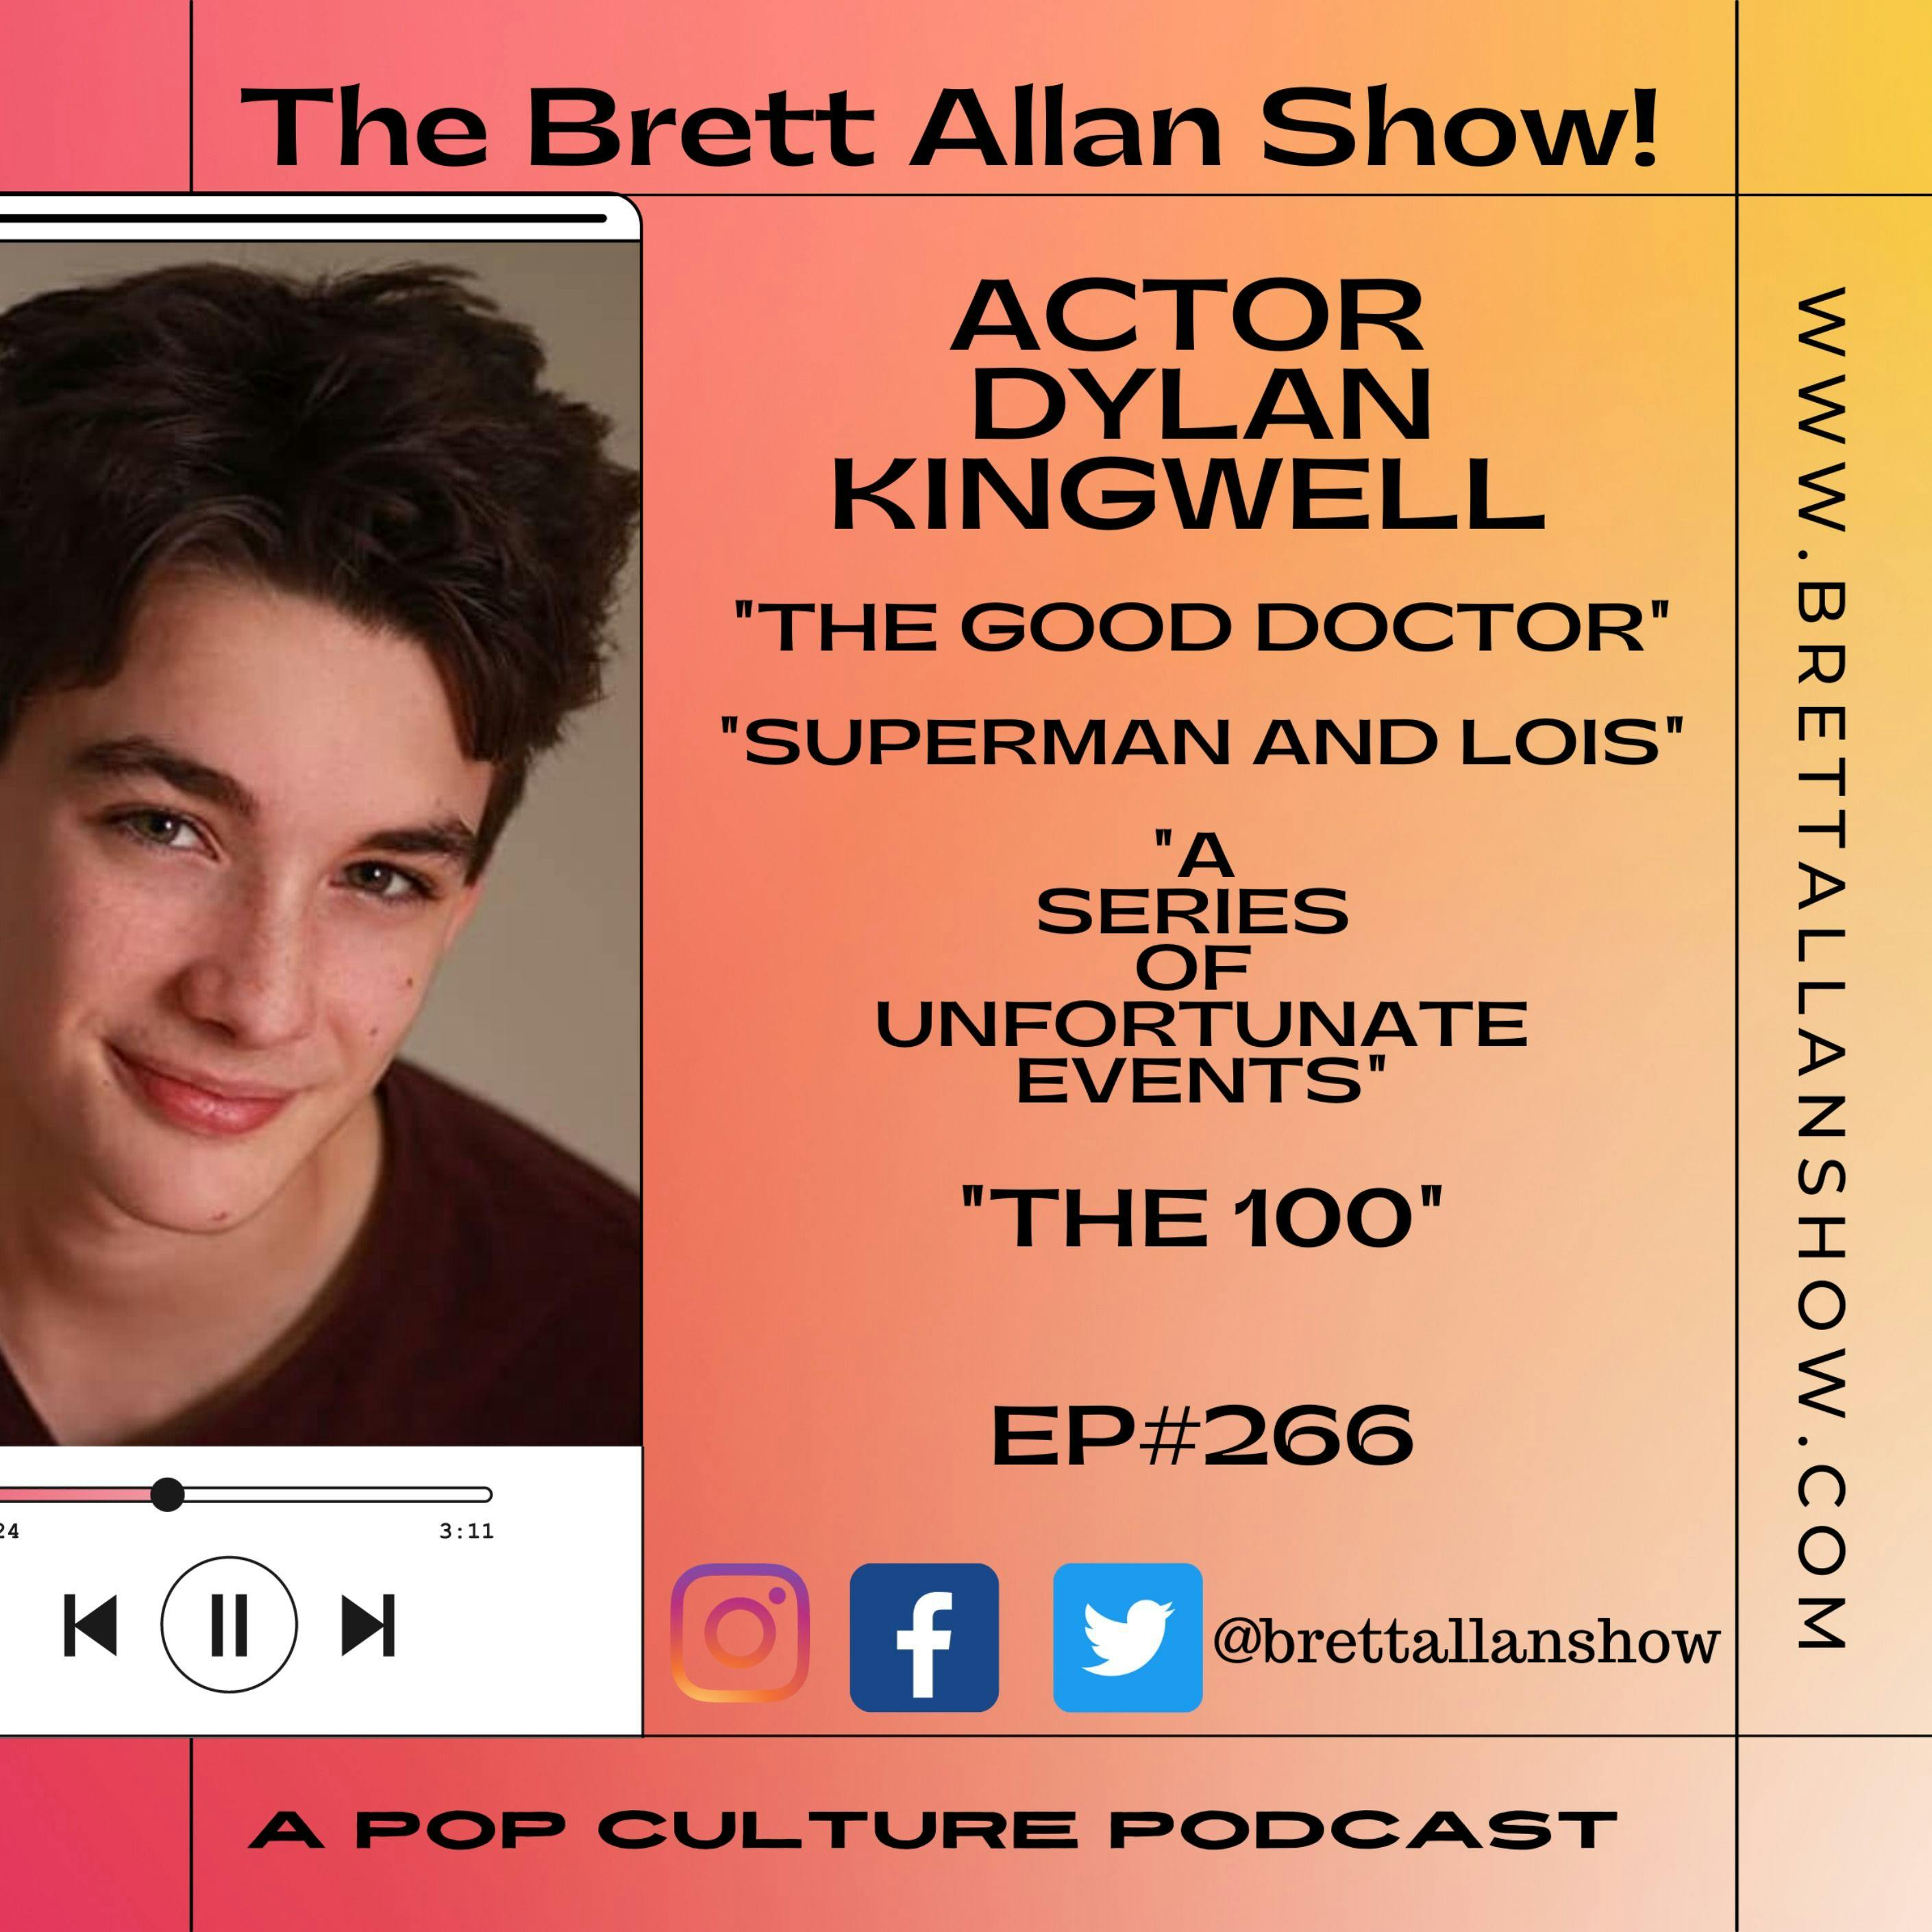 Actor Dylan Kingwell | "The Good Doctor" 'Superman and Lois" and "A Series Of Unfortunate Events" | "Kindness Goes A Long Way" Image